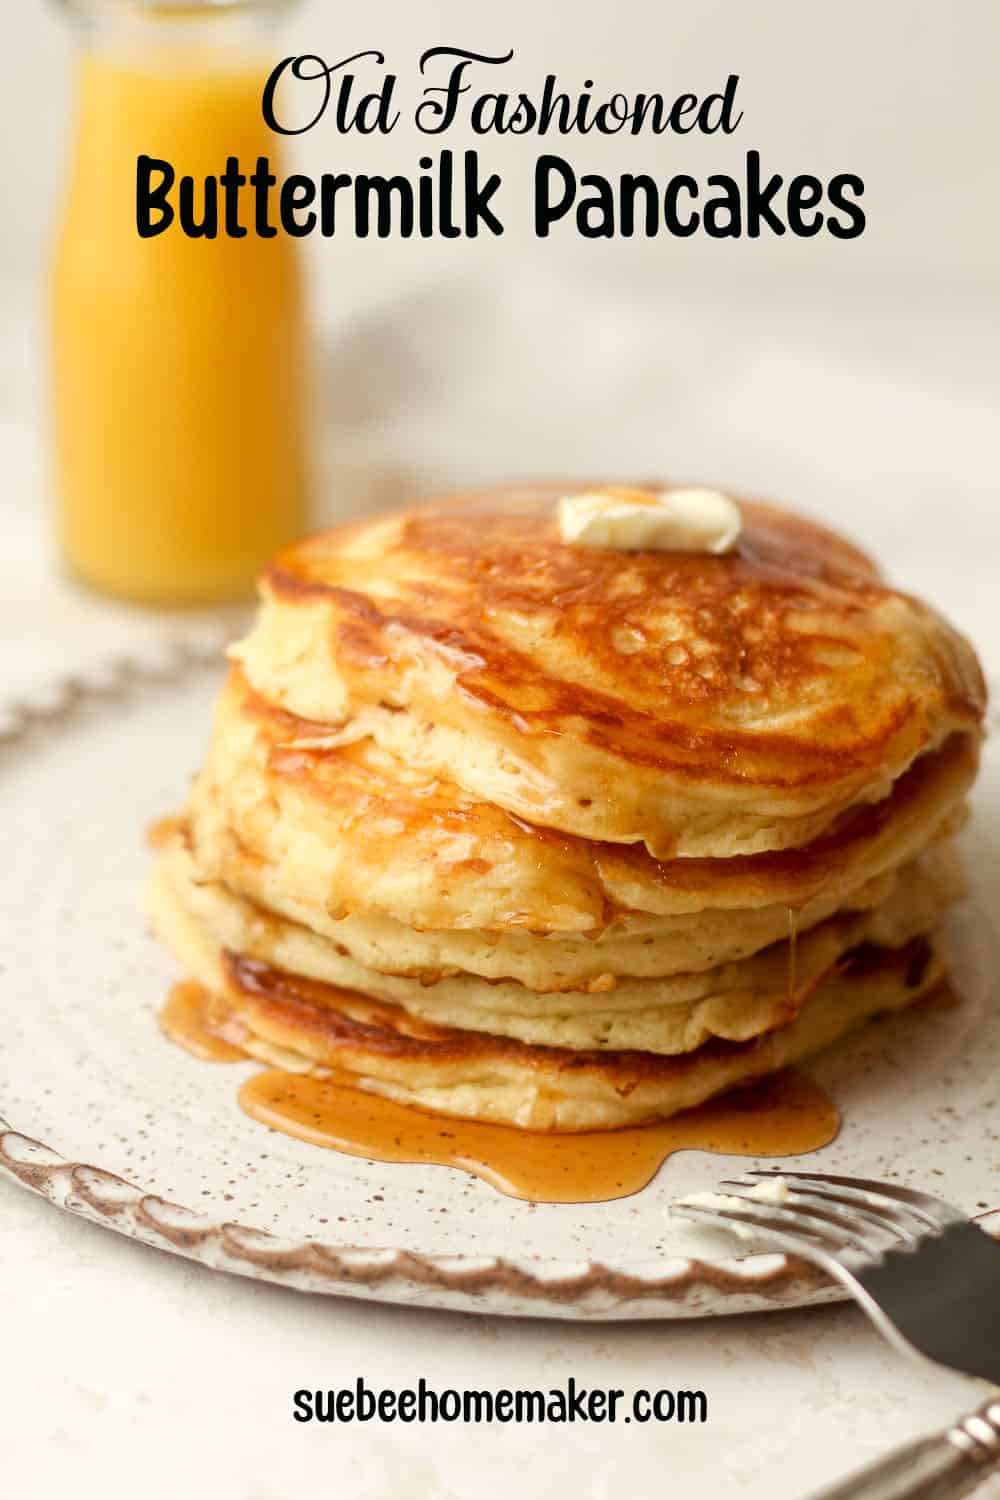 A stack of old fashioned buttermilk pancakes.